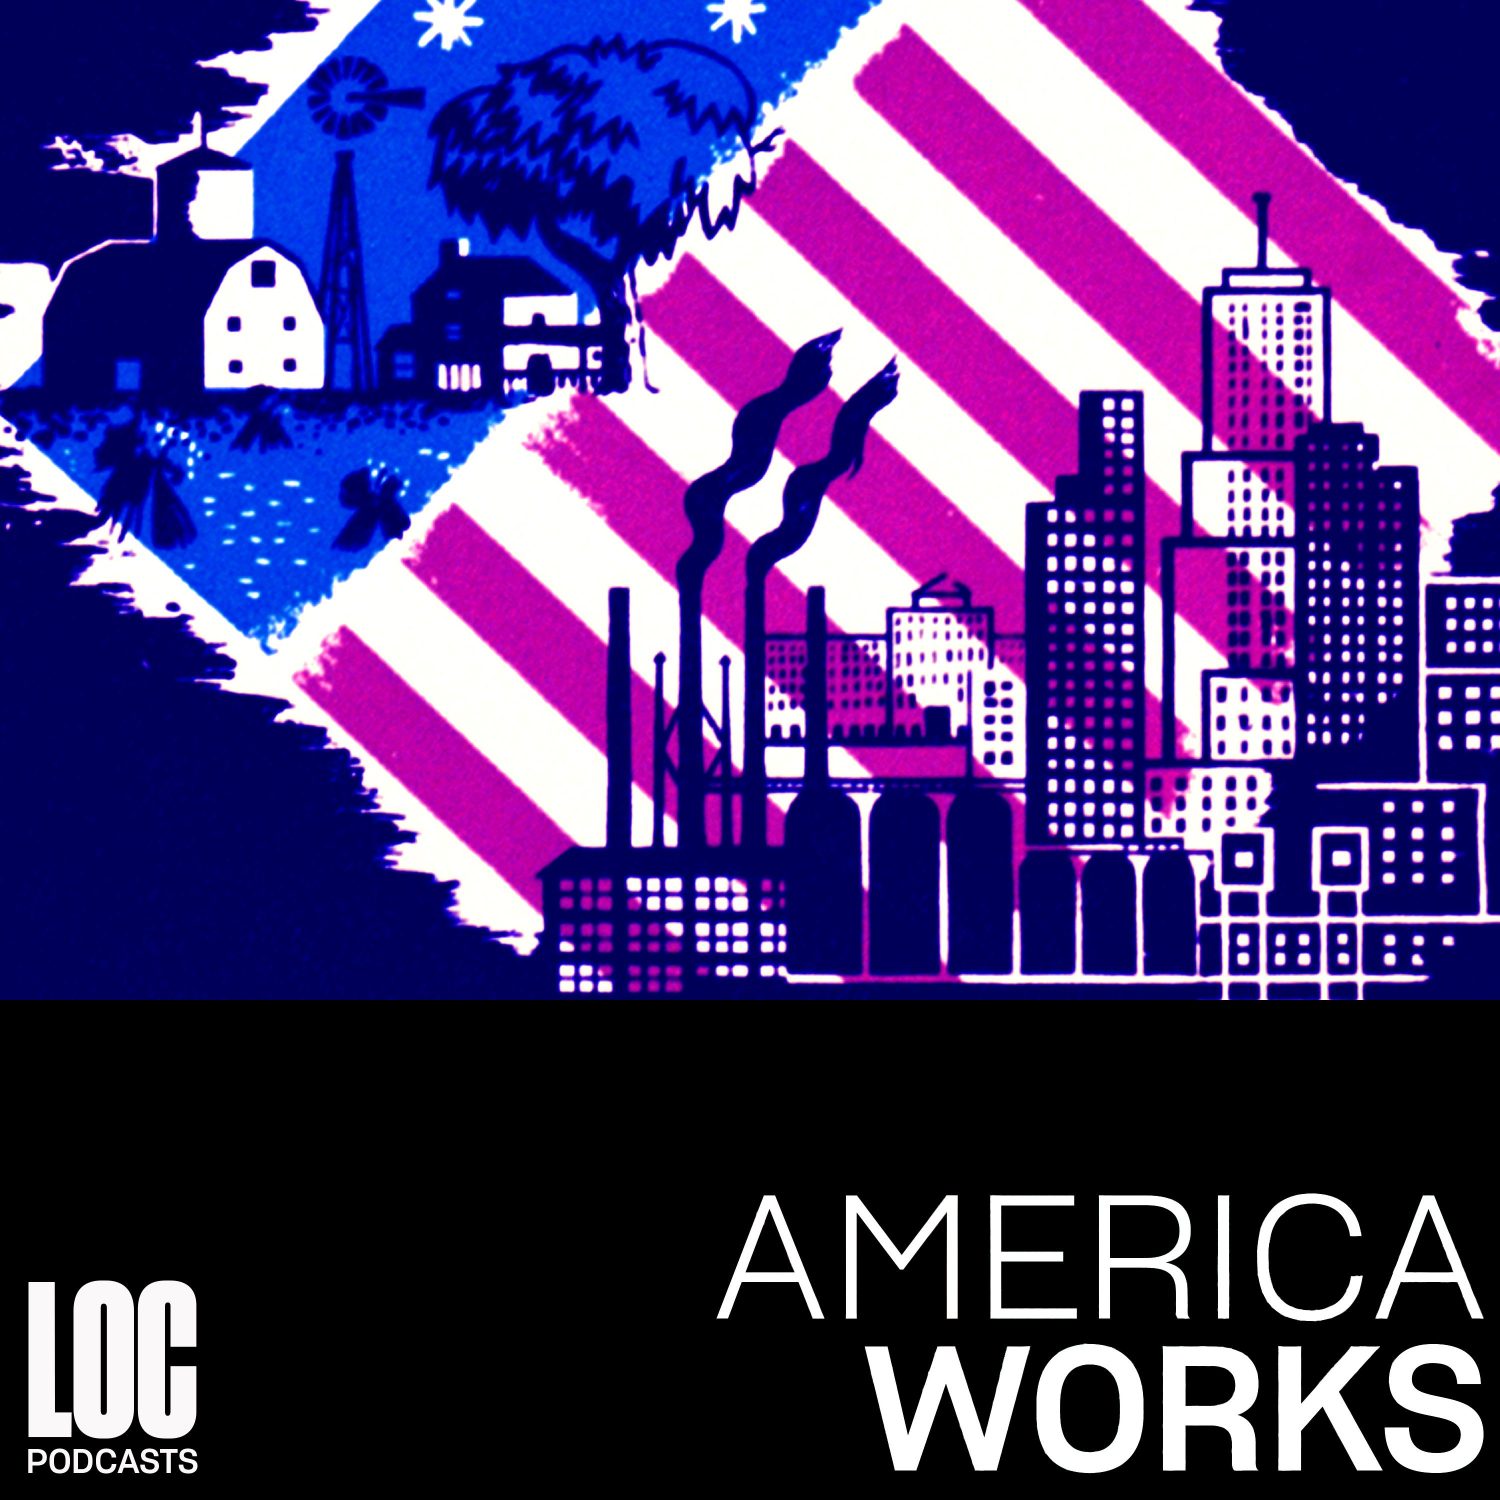 The american flag, raggedly crossing diagonally across a blue background, with images of farms and industry and skyscrapers in blue and purple tones. The words America Works and LOC in white against a black bottom background. 